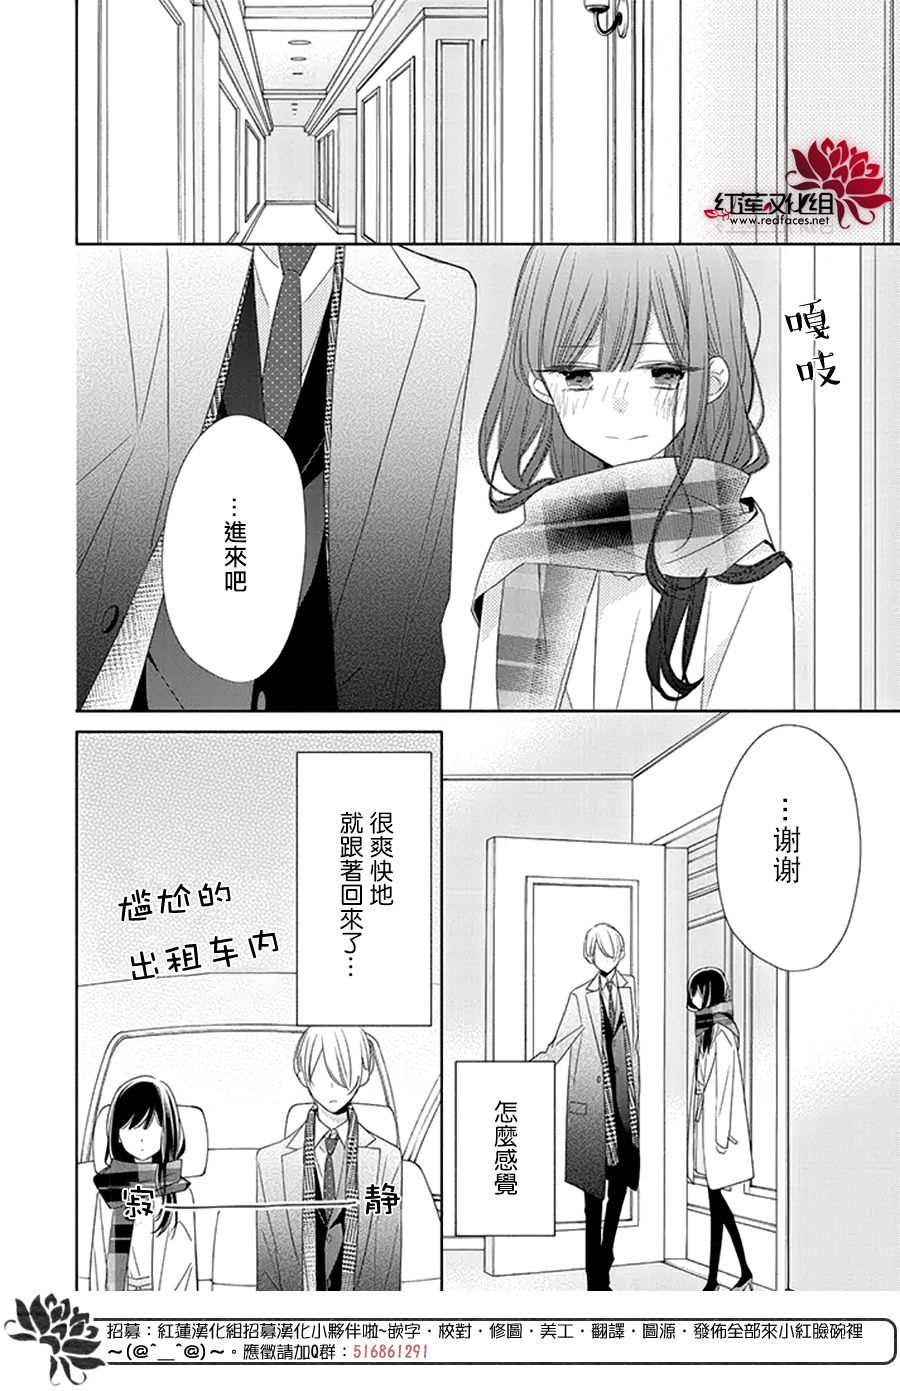 If given a second chance - 21話 - 2